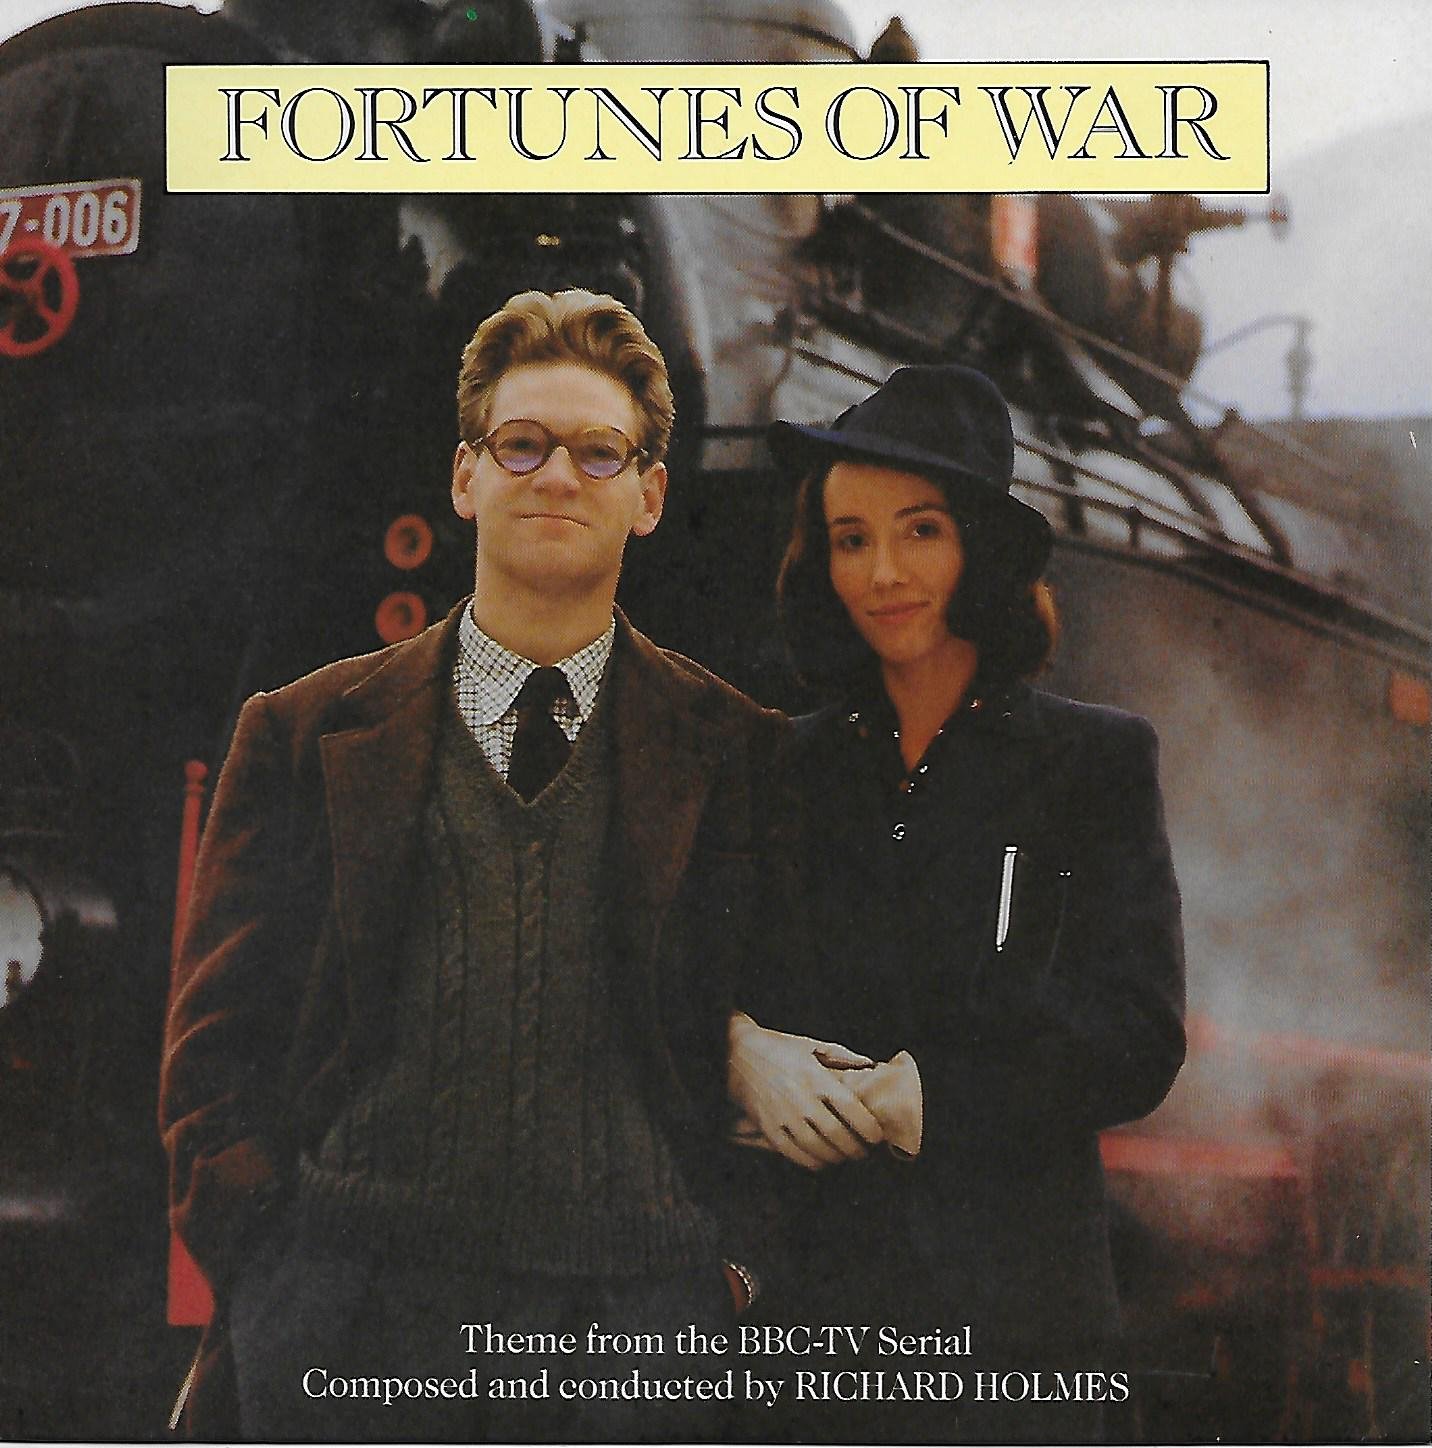 Picture of RESL 221 Fortunes of war by artist Pavel's Rumanian Ensemble / The United Kingdom Symphony Orchestra from the BBC singles - Records and Tapes library